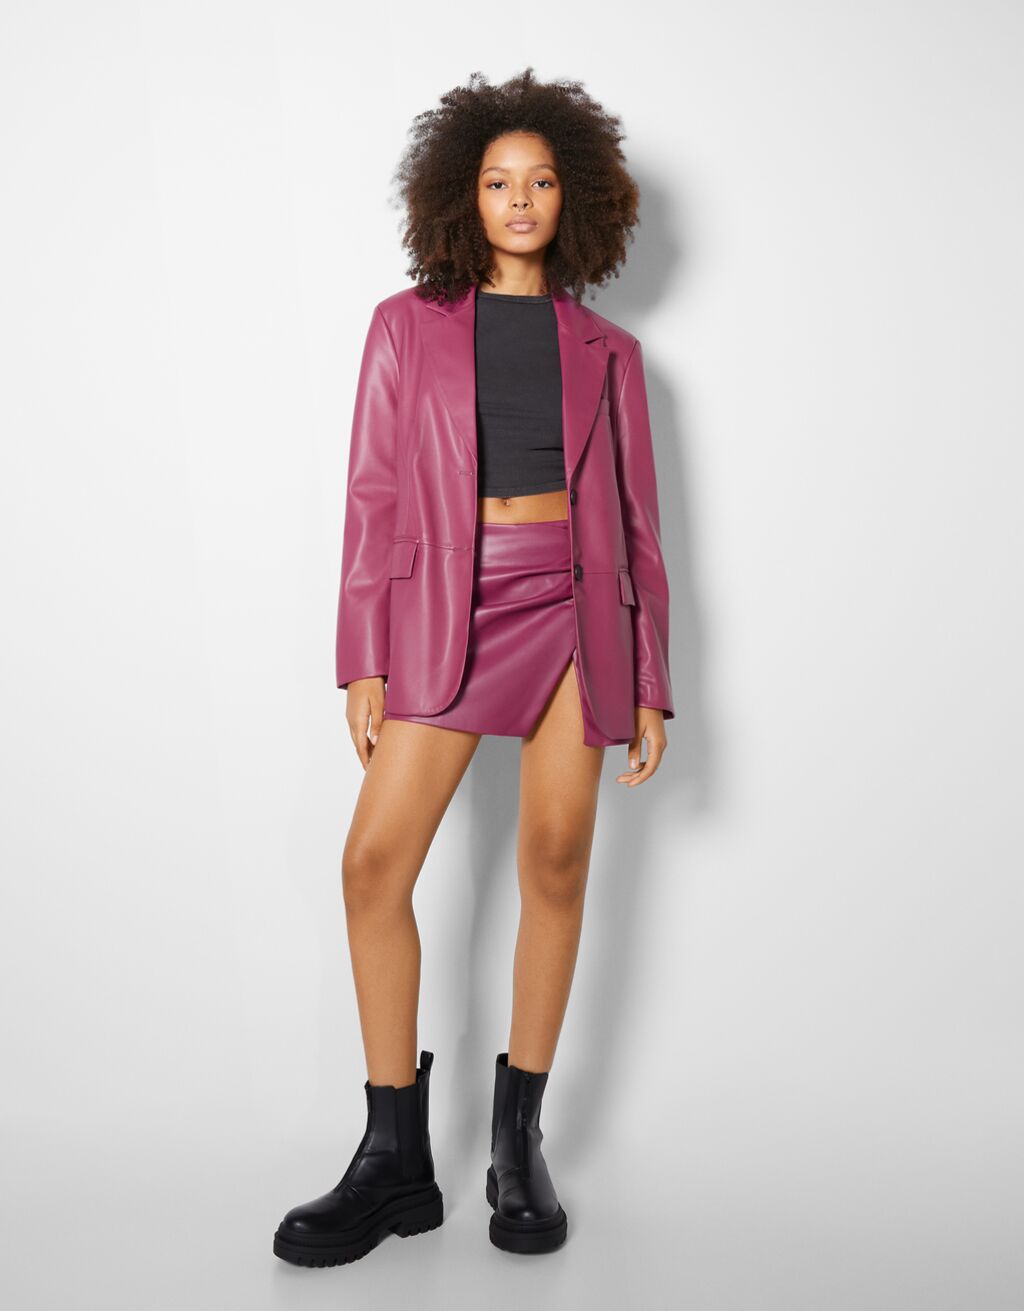 Blazer and faux leather skirt set